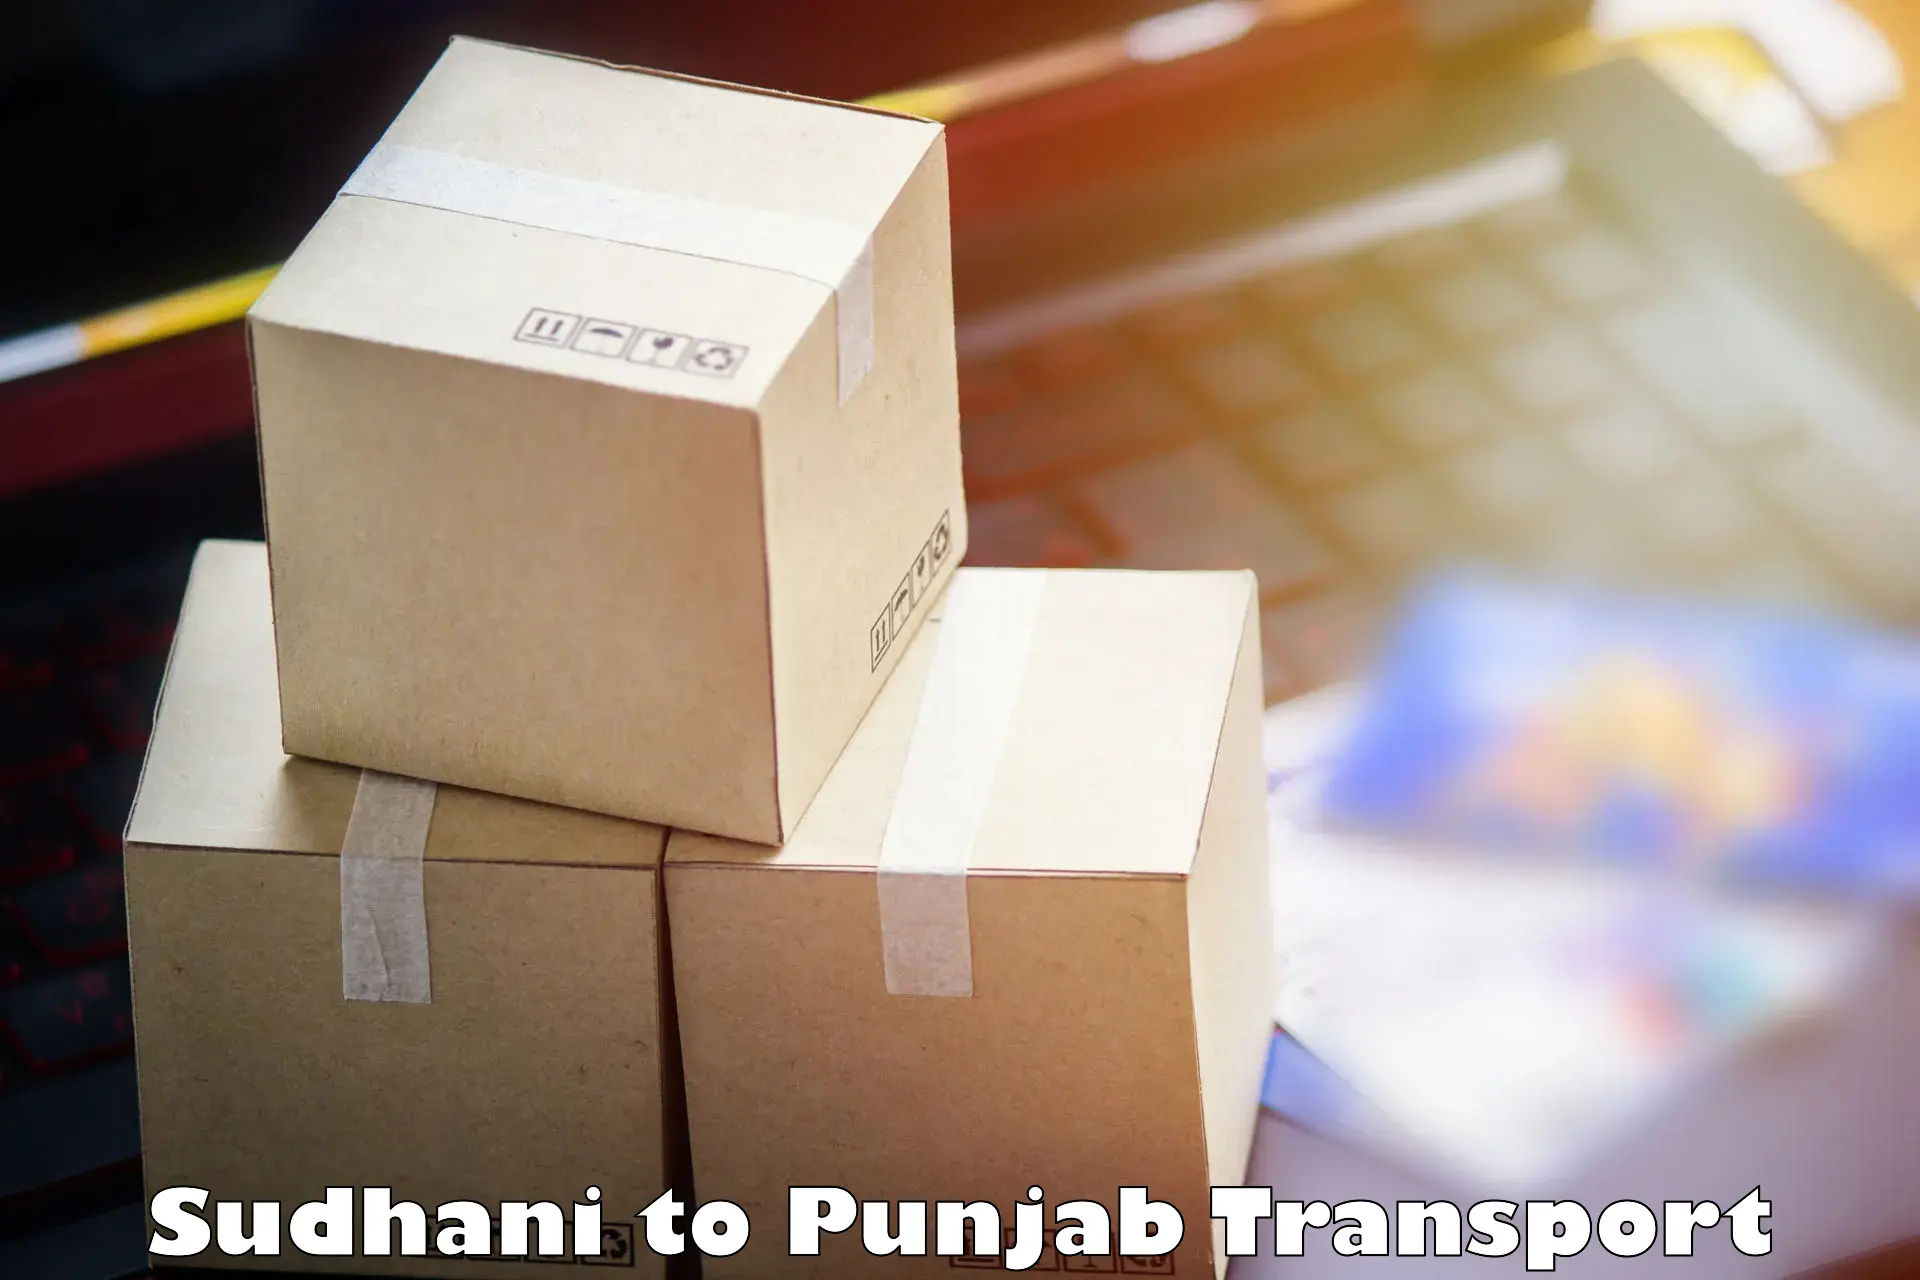 Delivery service Sudhani to Sultanpur Lodhi